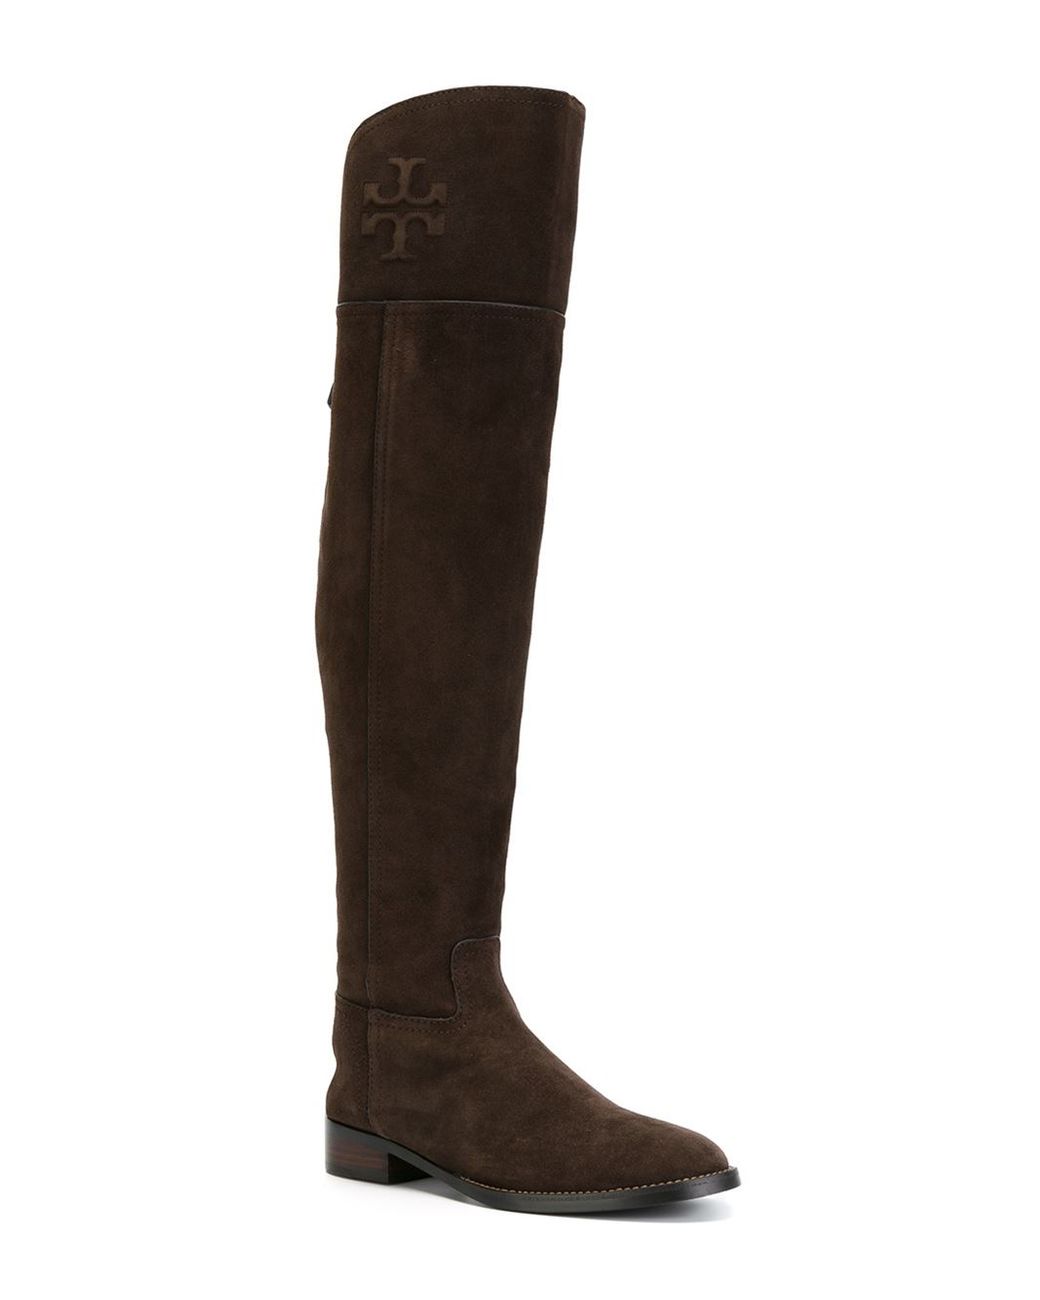 Tory Burch Thigh High Boots in Brown | Lyst